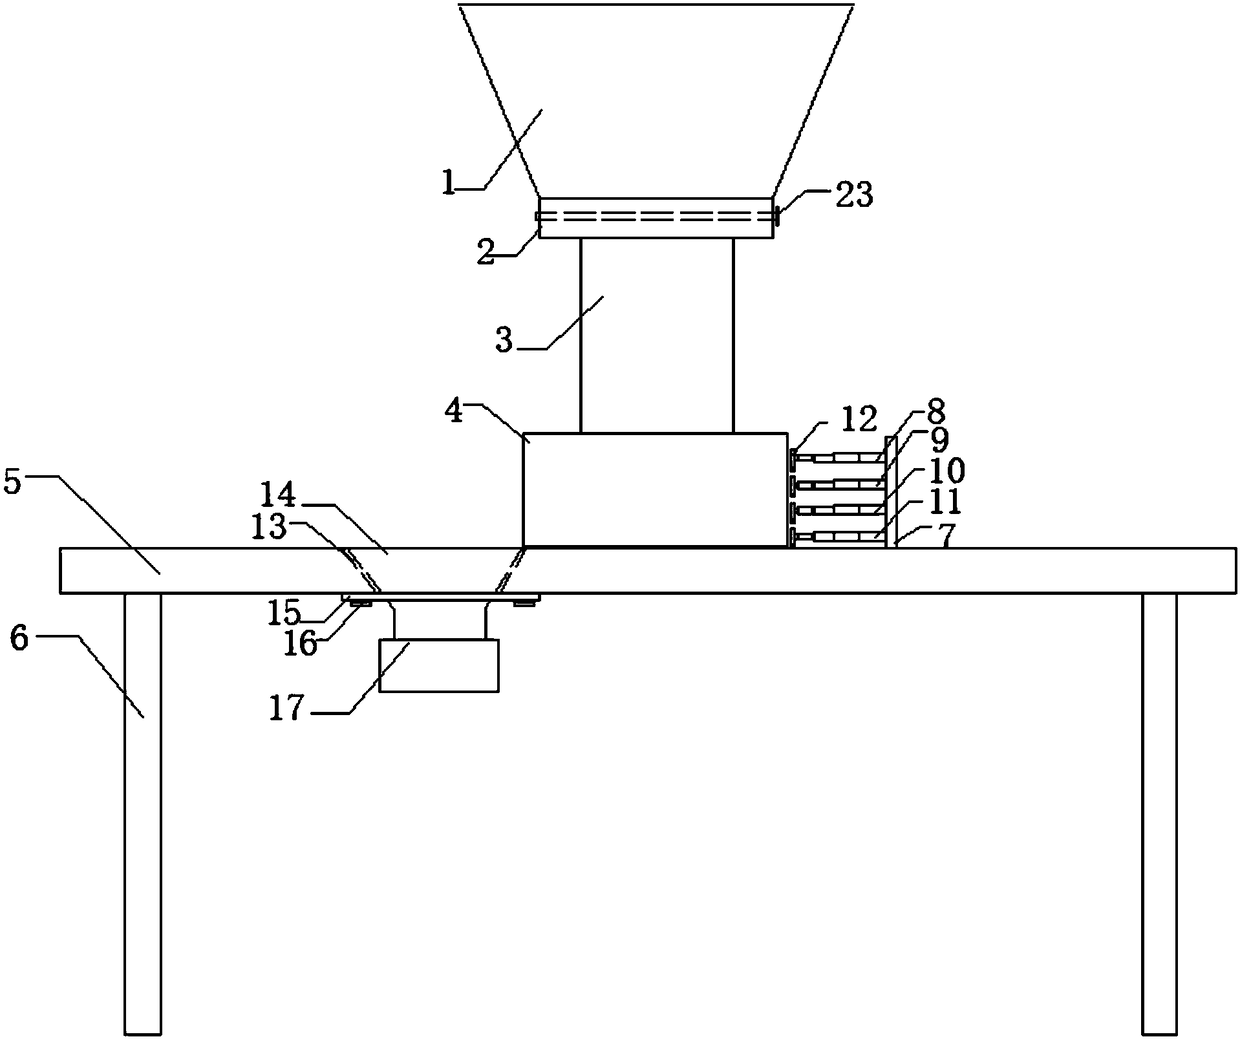 Magnetic substance removing device for silicon carbide powder